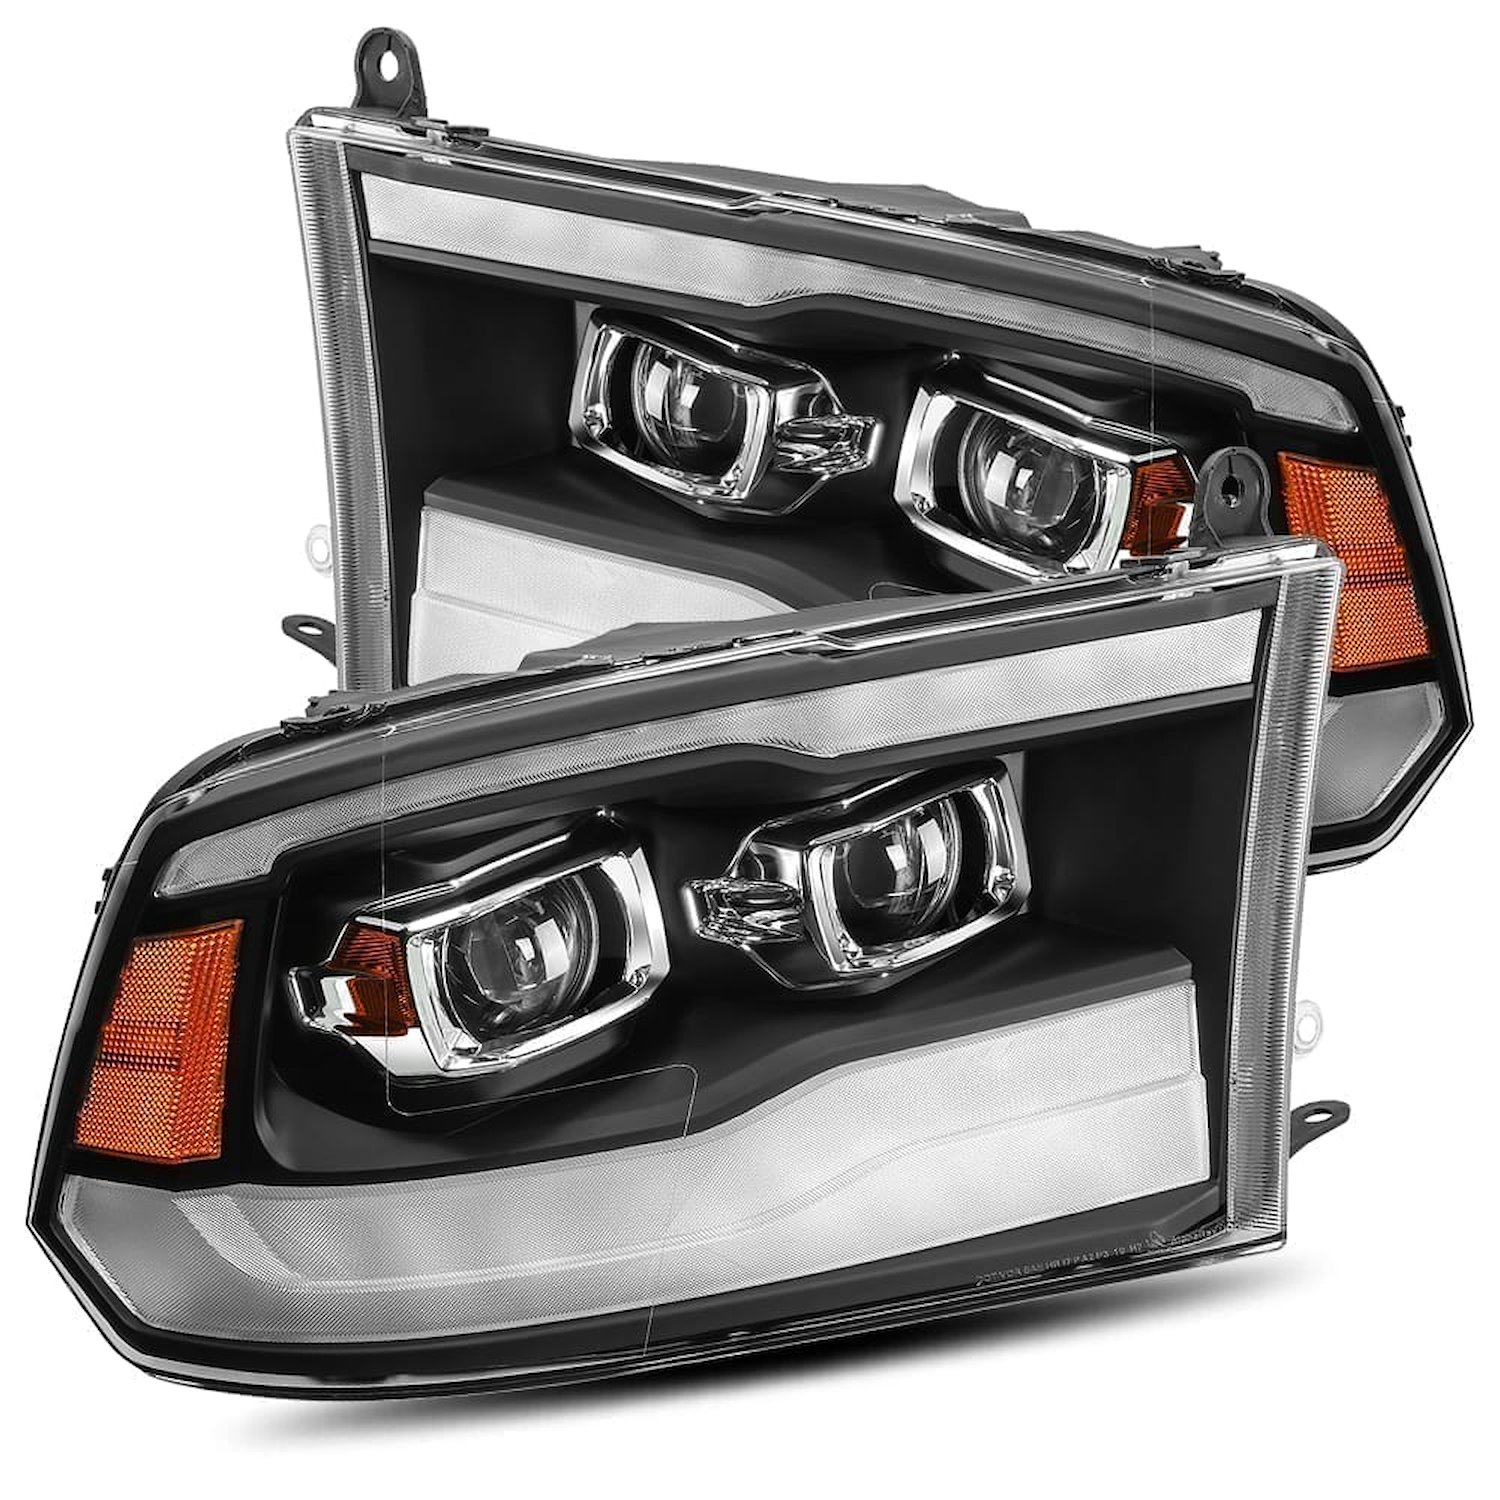 880539 Luxx-Series LED Projector Headlights for 2009-2018 Dodge/RAM 1500/2500/3500 - Black